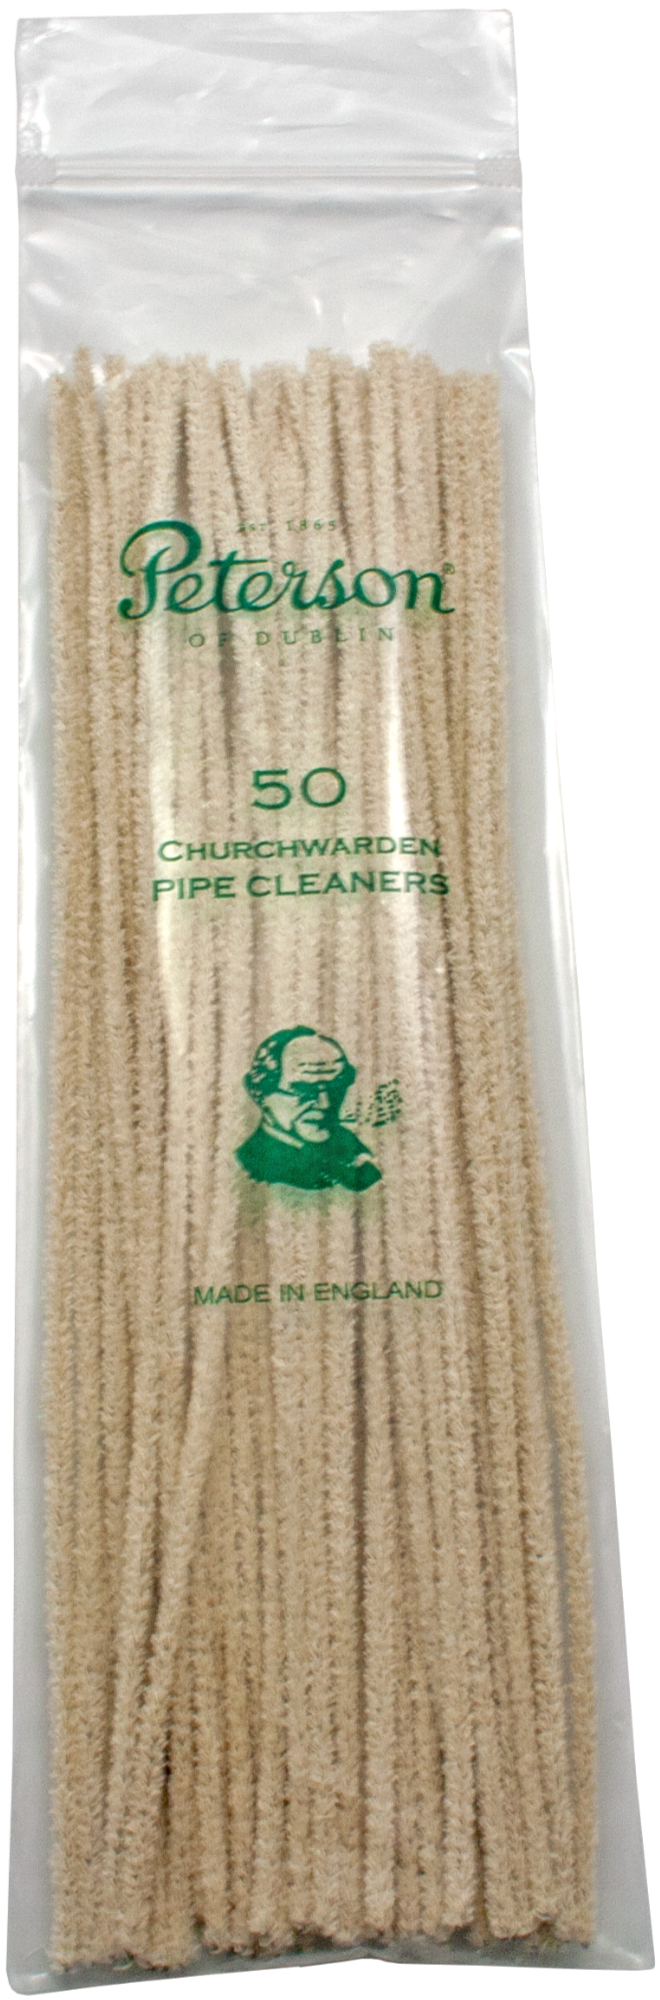 Peterson 50 Pipe Cleaner Cotton Long (12x)